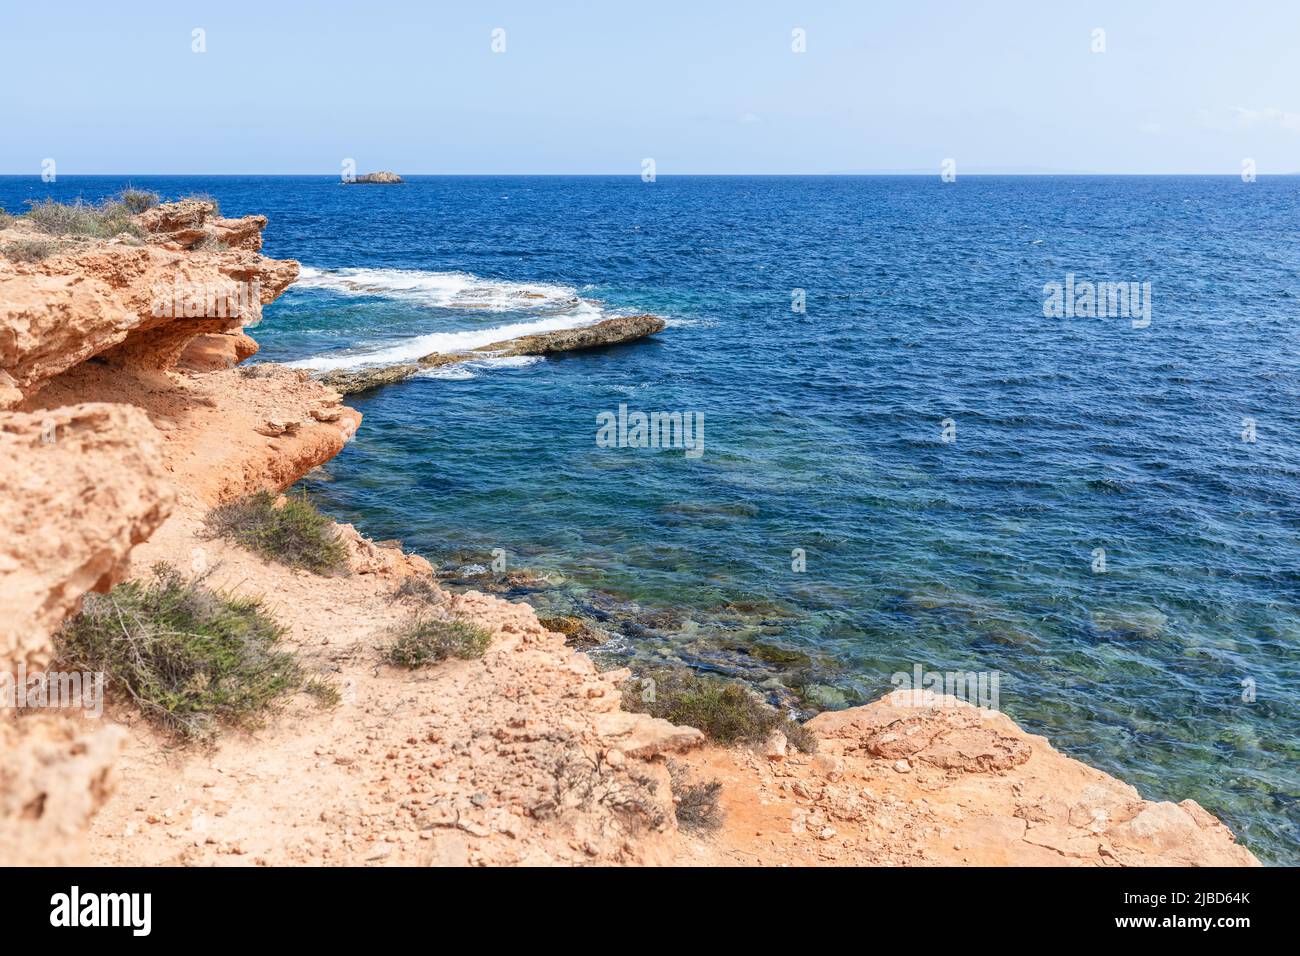 Orange-pink rocky coast with rare plants, water changes color depending on depth, clear sky, summer day, Ibiza, Balearic Islands, Spain Stock Photo